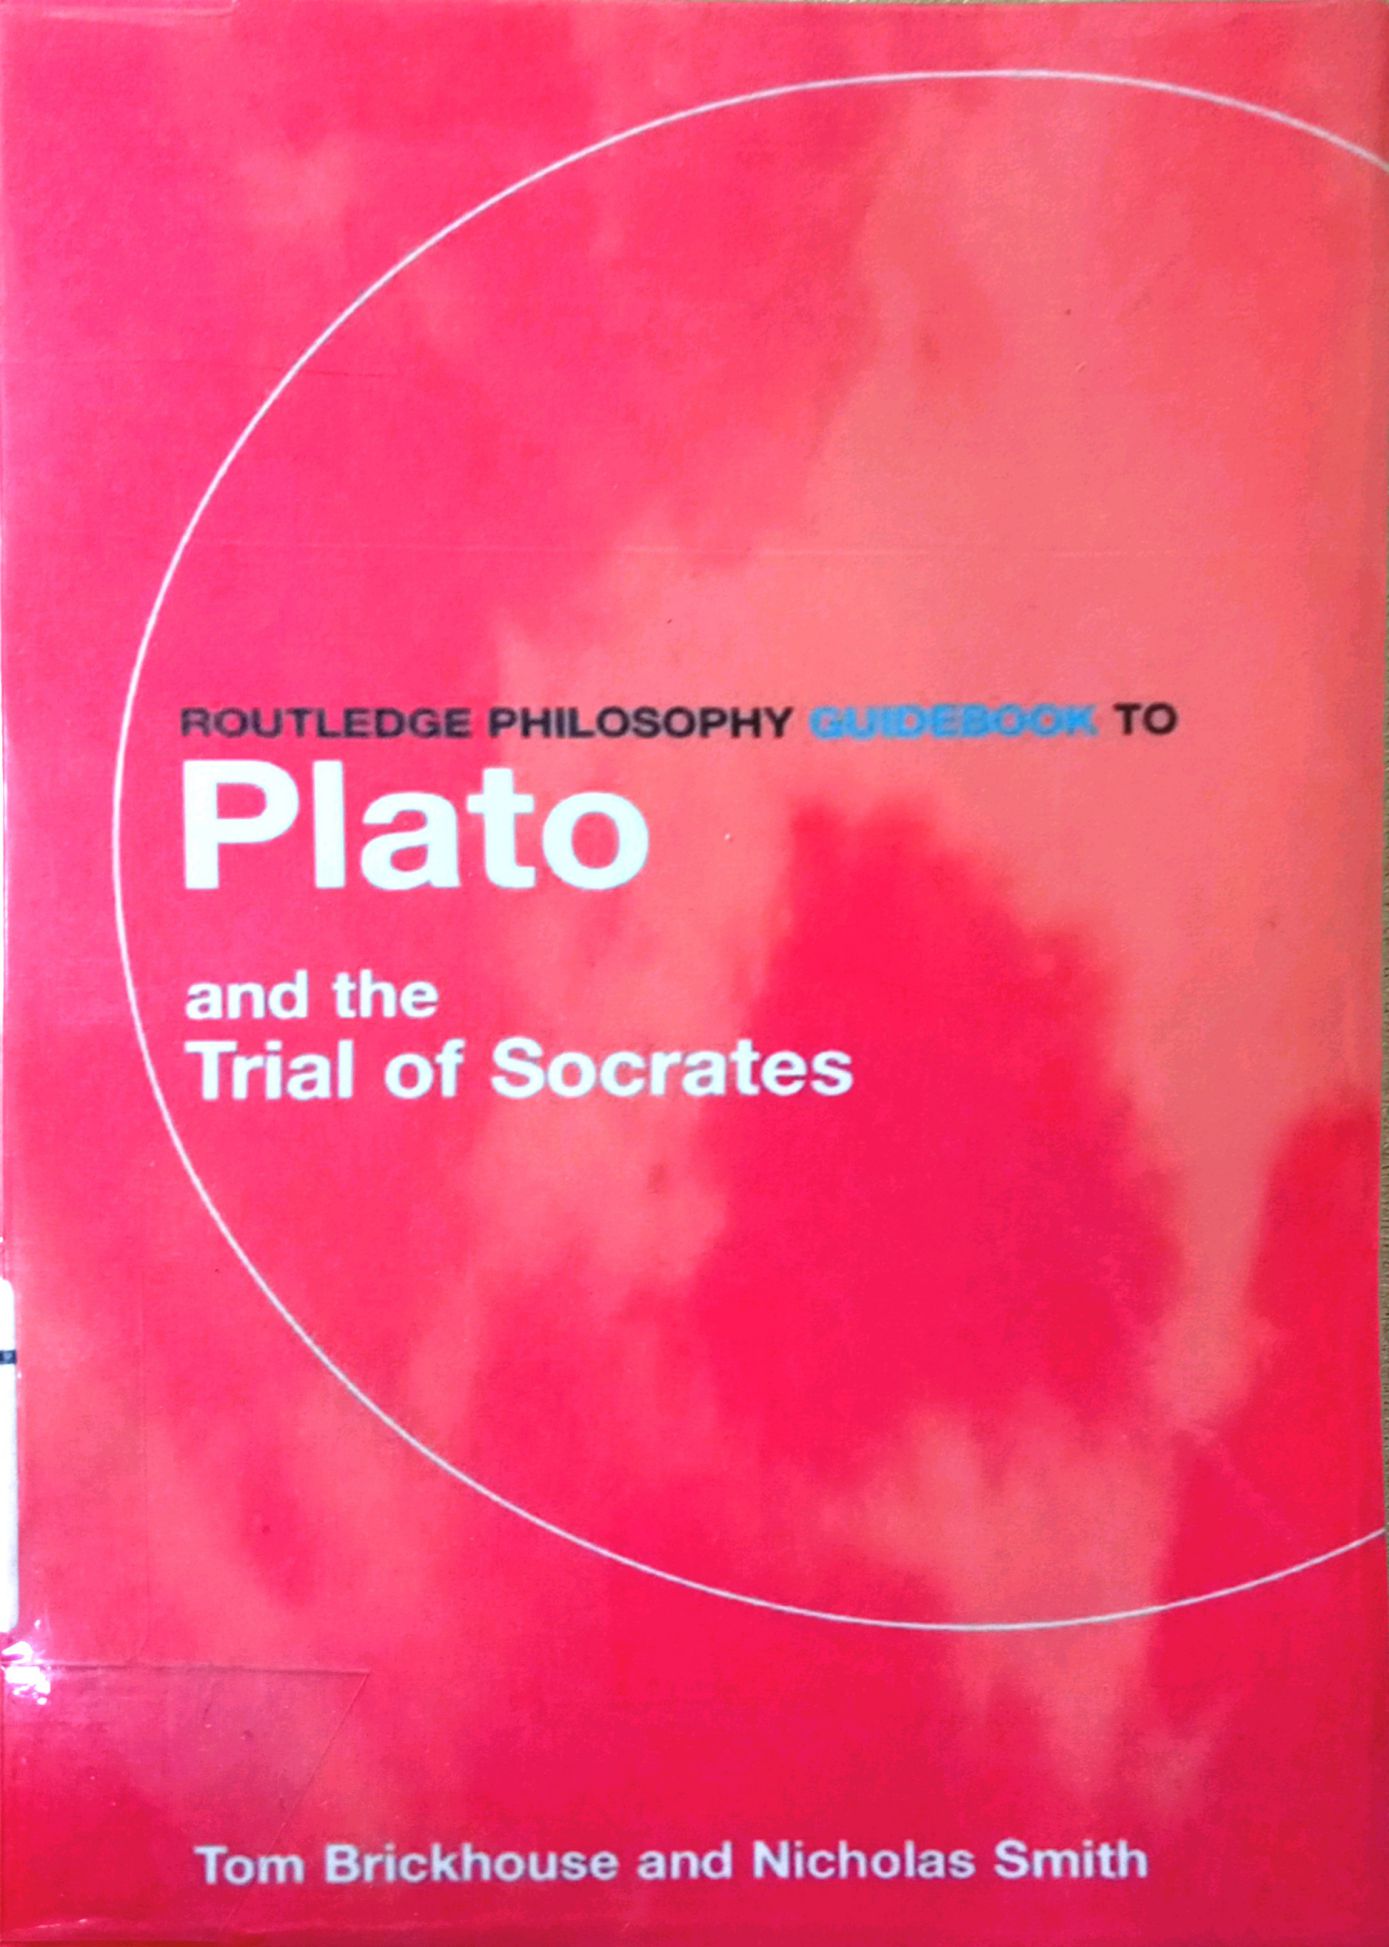 ROUTLEDGE PHILOSOPHY GUIDEBOOK TO PLATO AND THE TRIAL OF SOCRATES